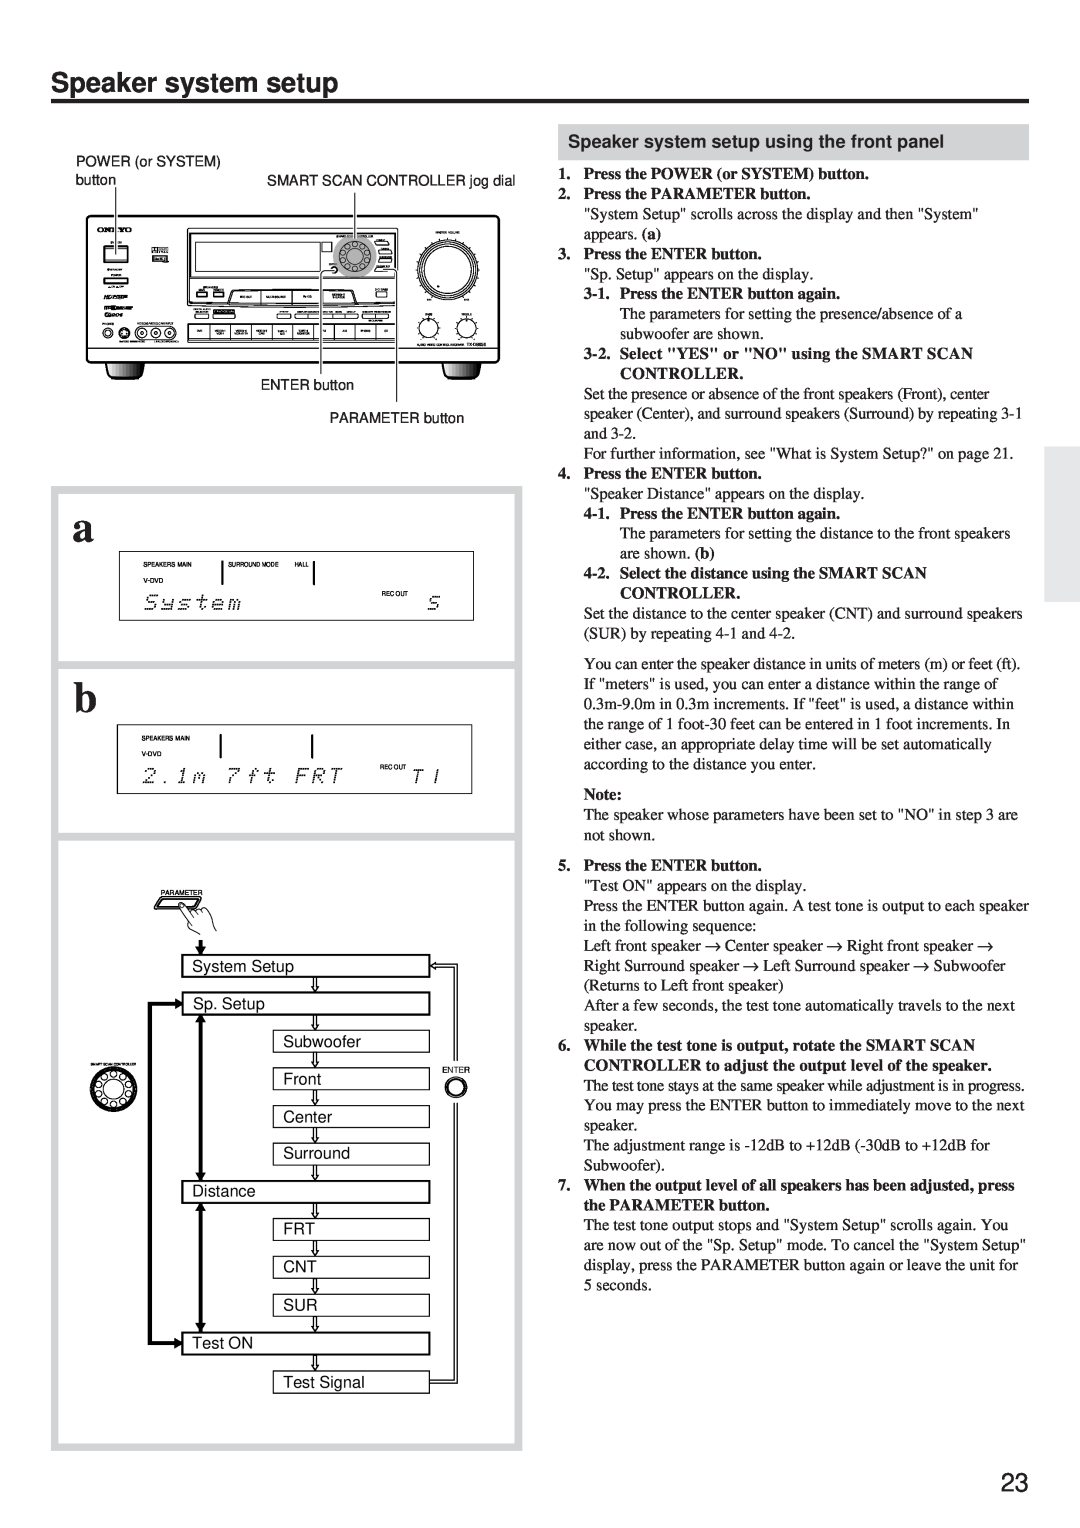 Onkyo TX-DS656 instruction manual Speaker system setup using the front panel 